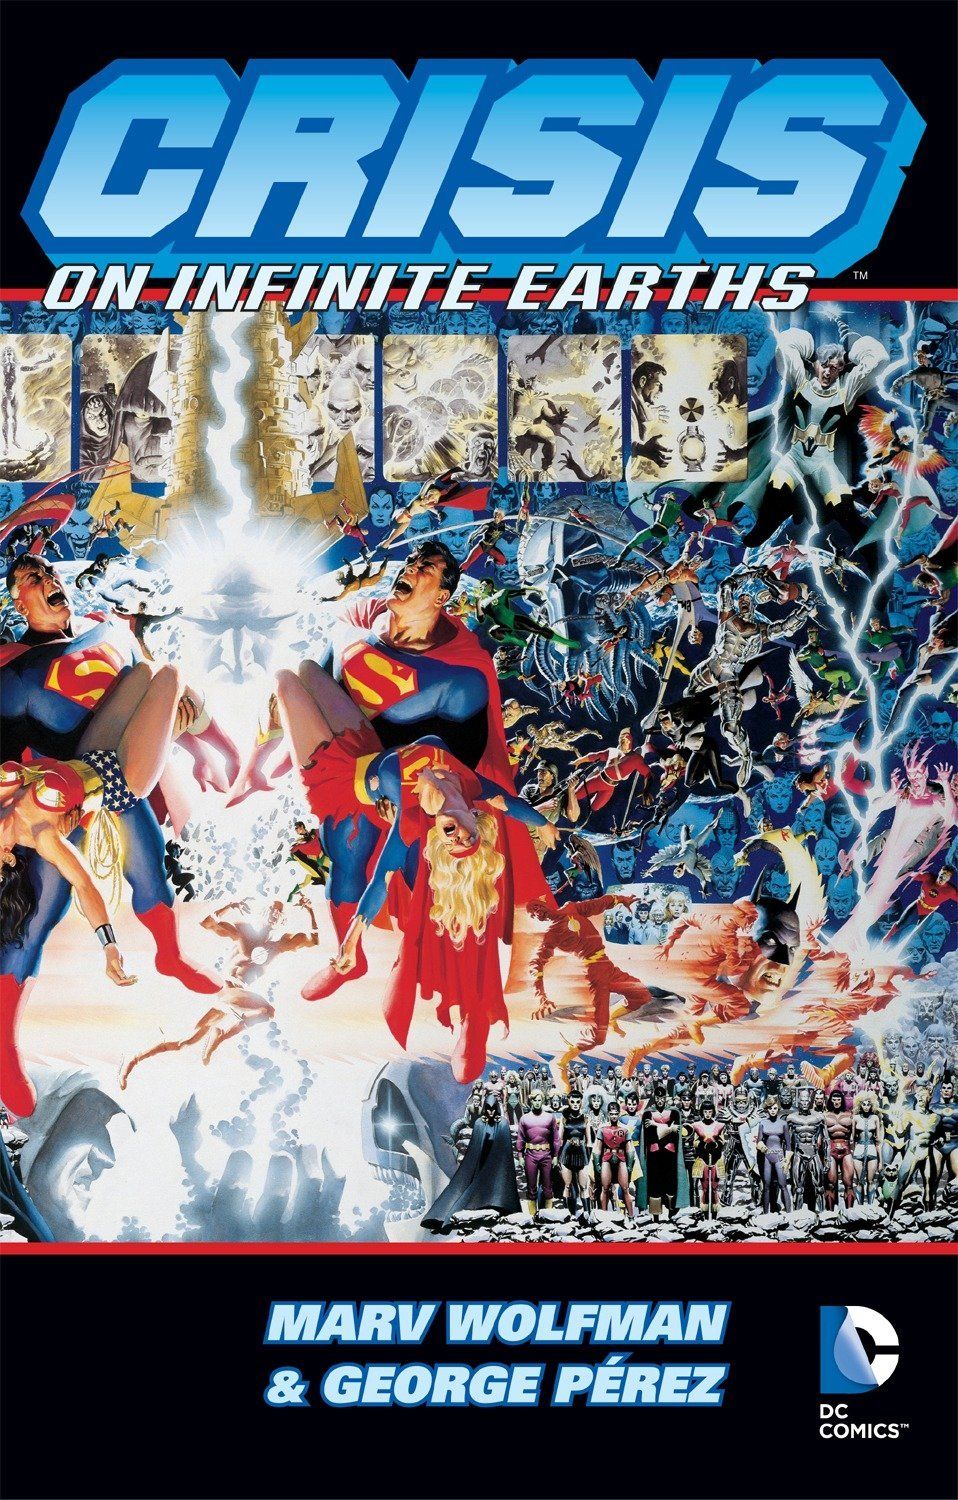 <p><strong>$20.45</strong></p><p>The Silver Age began with the introduction of Barry Allen and it ended with his death. Fearing that its universe of multiple realities and deep backstories had become too convoluted for the average reader, DC Comics decided to recreate its universe. <em>Crisis on Infinite Earths</em> set all of DC’s heroes against the Anti-Monitor, a reality-destroying creature who gobbled up the various realities. By the end of the story, the DC Universe had forever changed, restored as a world with a single reality and a restarted continuity. </p><p>That victory, such as it was, came at the cost of many heroes’ lives, including that of Superman’s cousin Supergirl. But none were as memorable as the brave sacrifice of Barry Allen. As the only one who can move fast enough to destroy the Anti-Monitor’s horrific machine, Barry pushes himself to the limit, eventually dissolving into pure energy, but not before he appears to his friends as a ghostly figure one last time, presented in powerful detail by the late, great penciler George Perez. <em>Crisis</em> writer Marv Wolfman intended the death to be only temporary, believing that Barry would once again rematerialize, but that did not happen for decades, making Barry’s death one of the most potent in all of comics.</p>